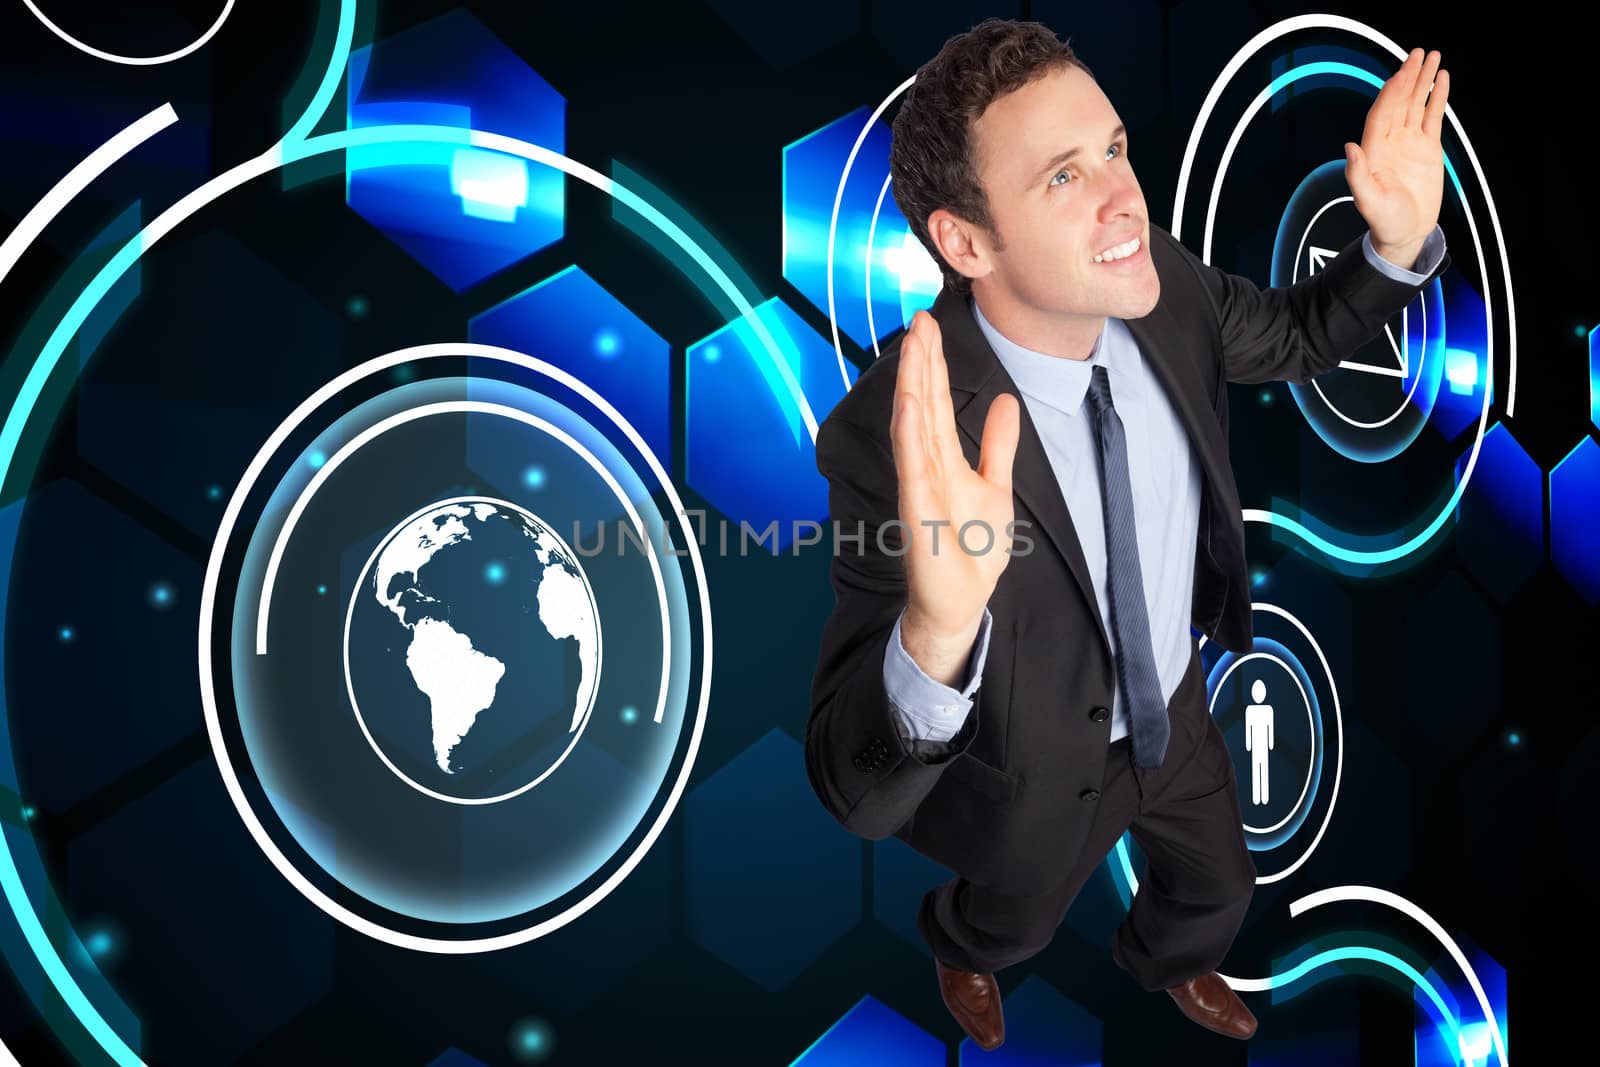 Composite image of businessman posing with arms raised by Wavebreakmedia